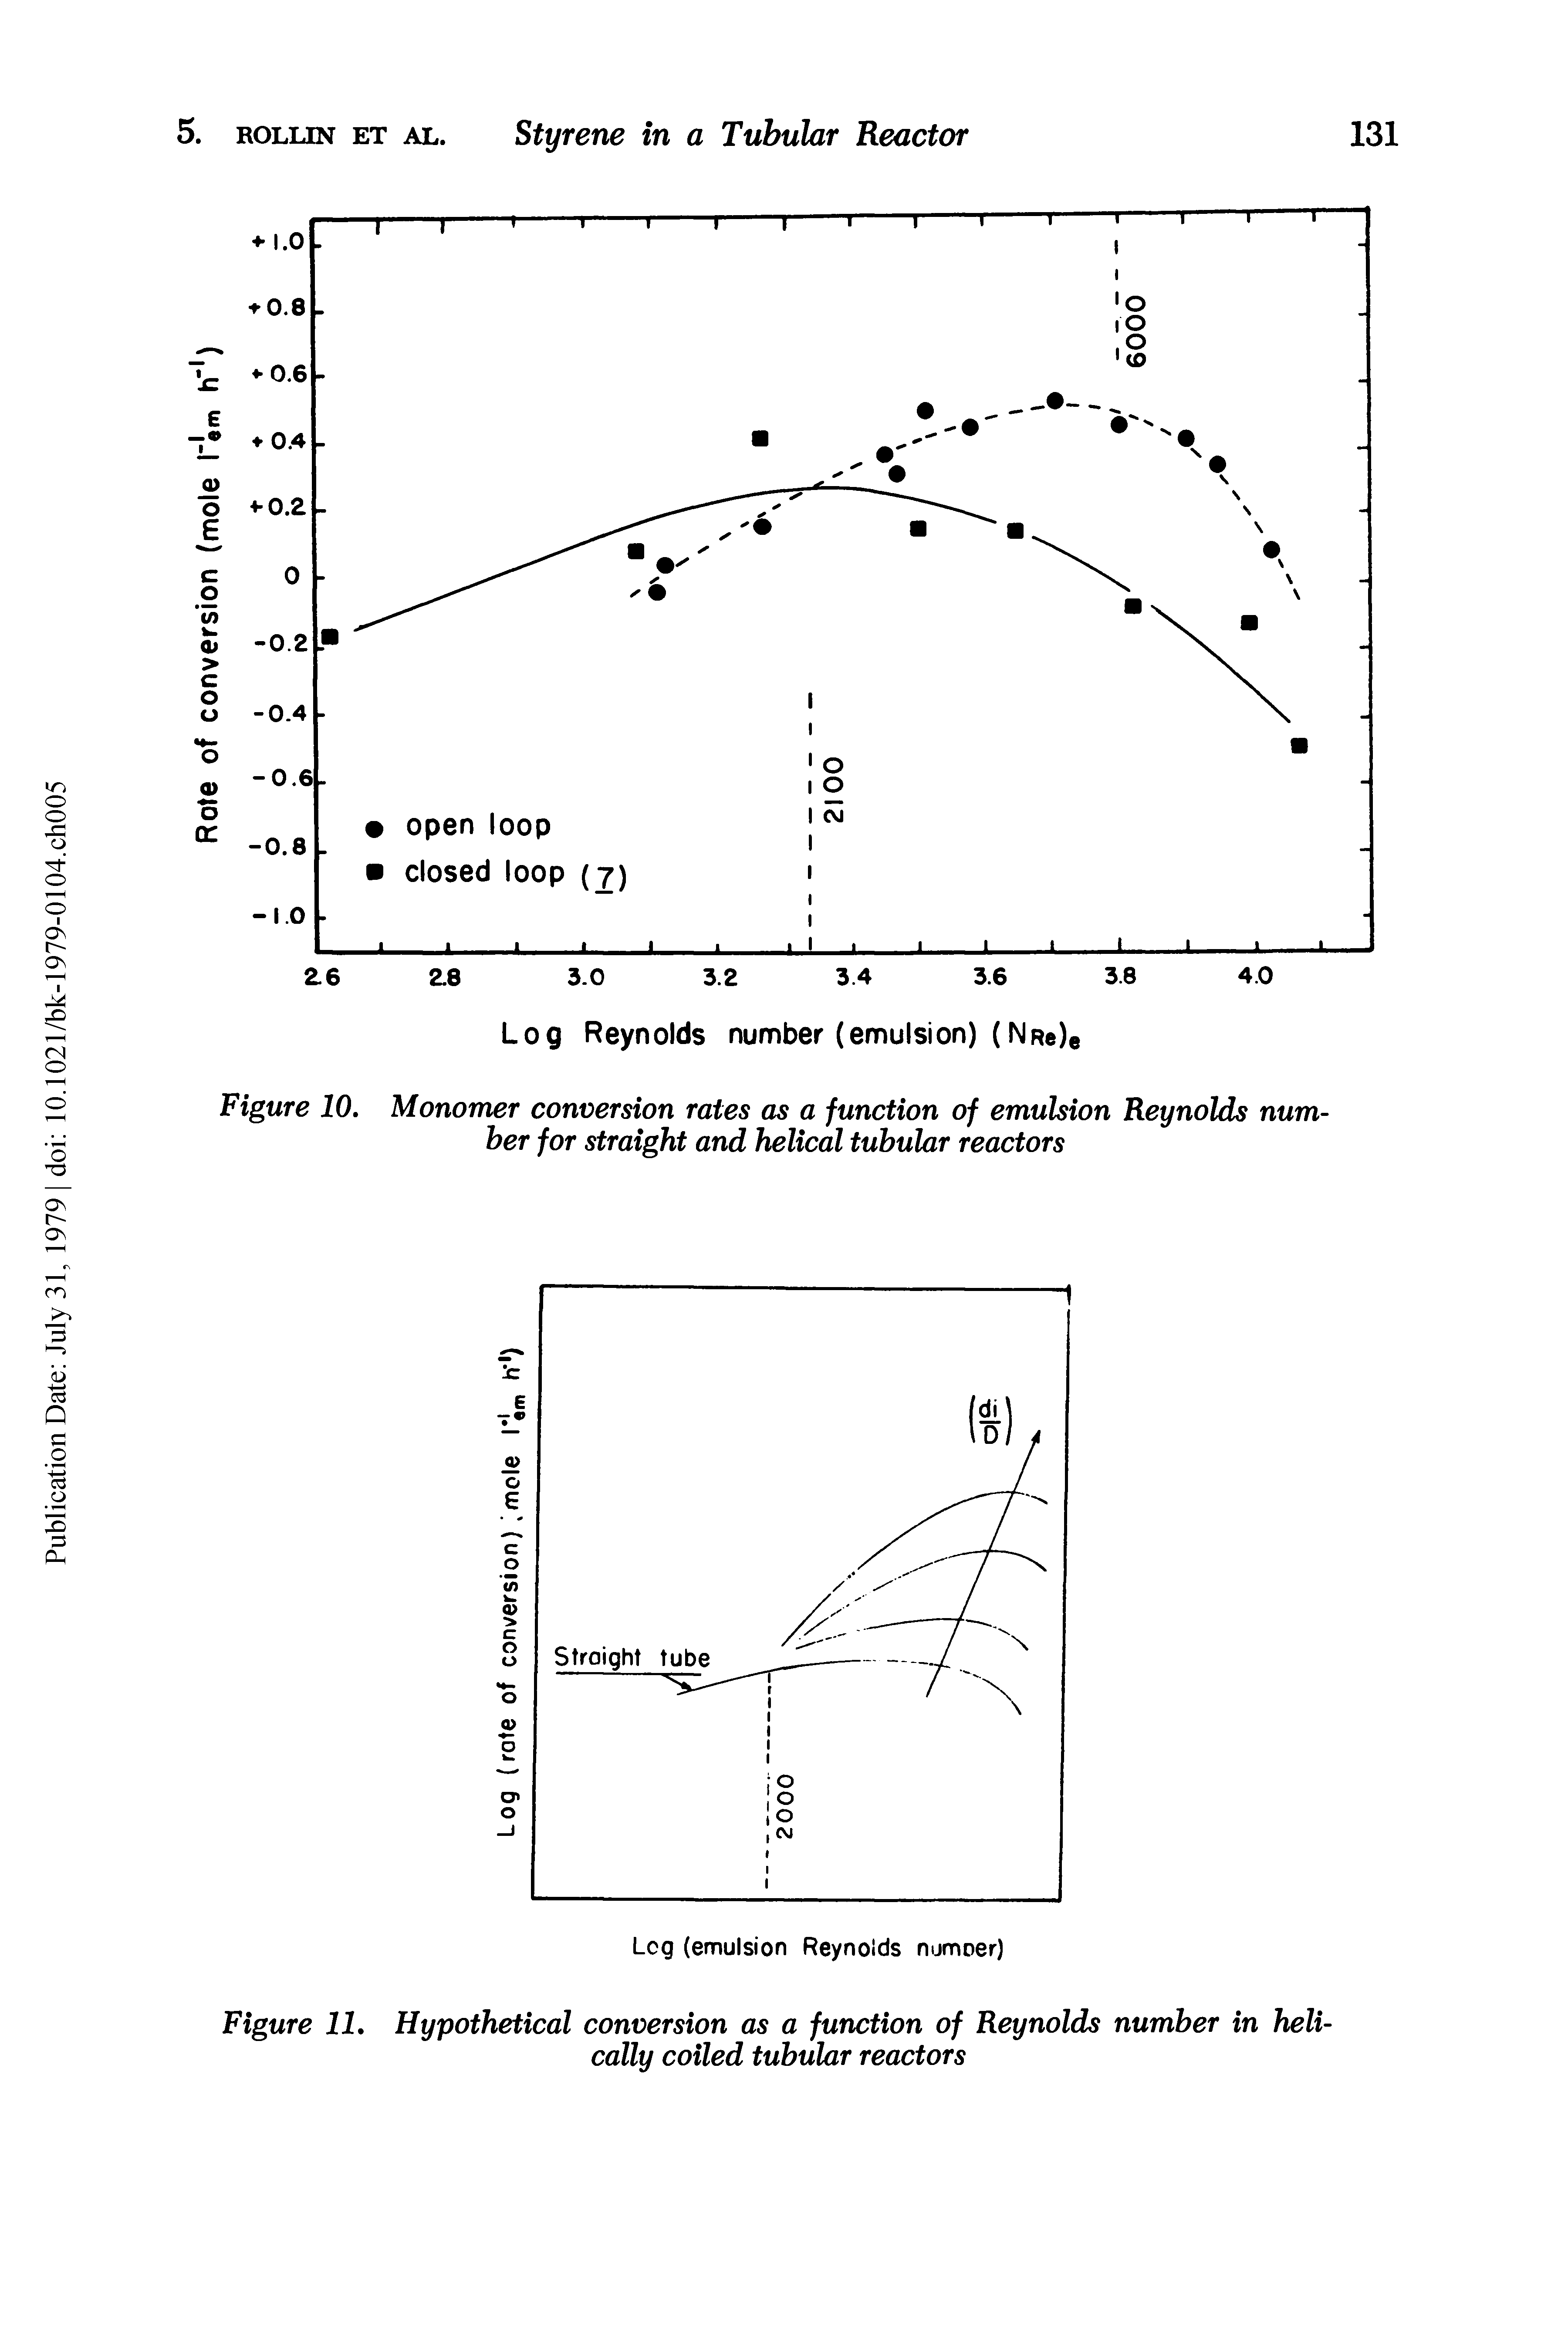 Figure 10. Monomer conversion rates as a function of emulsion Reynolds number for straight and helical tubular reactors...